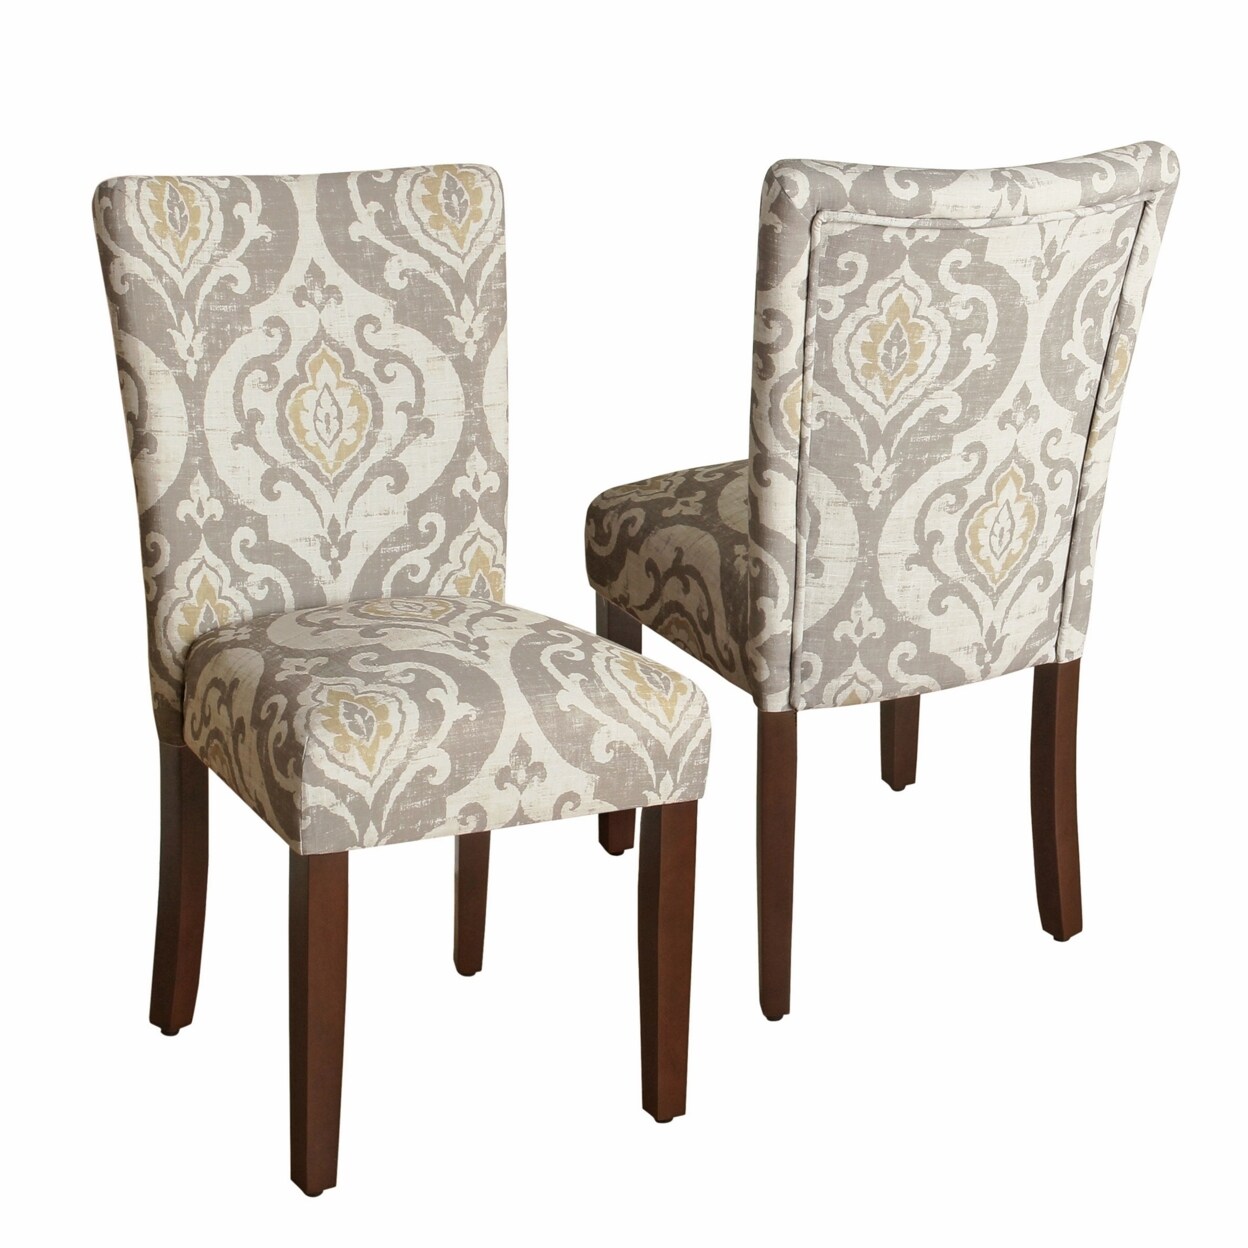 One Chair, Two Different Fabrics - Driven by Decor